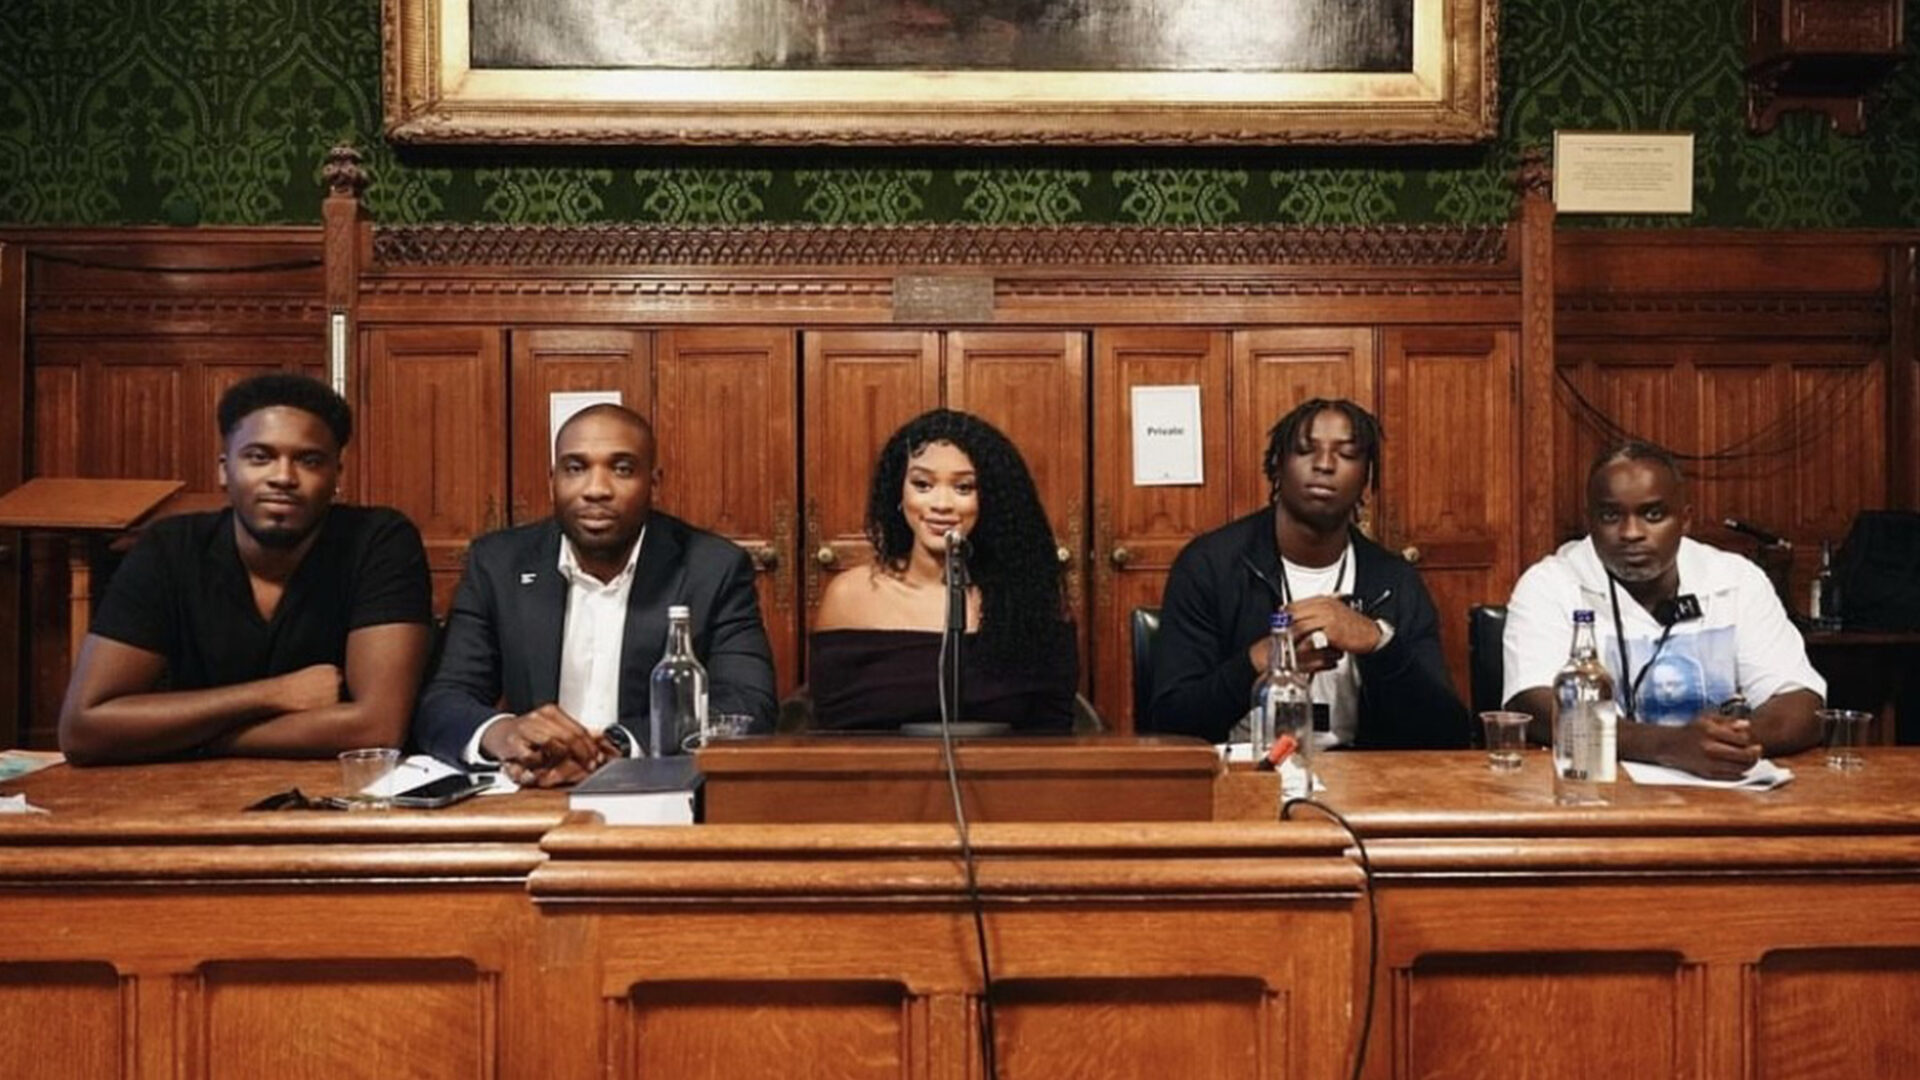 County Lines Event Speakers . Enact Equality hosted a panel event at the Houses of Parliament to provide a thought-provoking discussion centred on topics relating to county lines, gang violence, drug use and structural inequality.